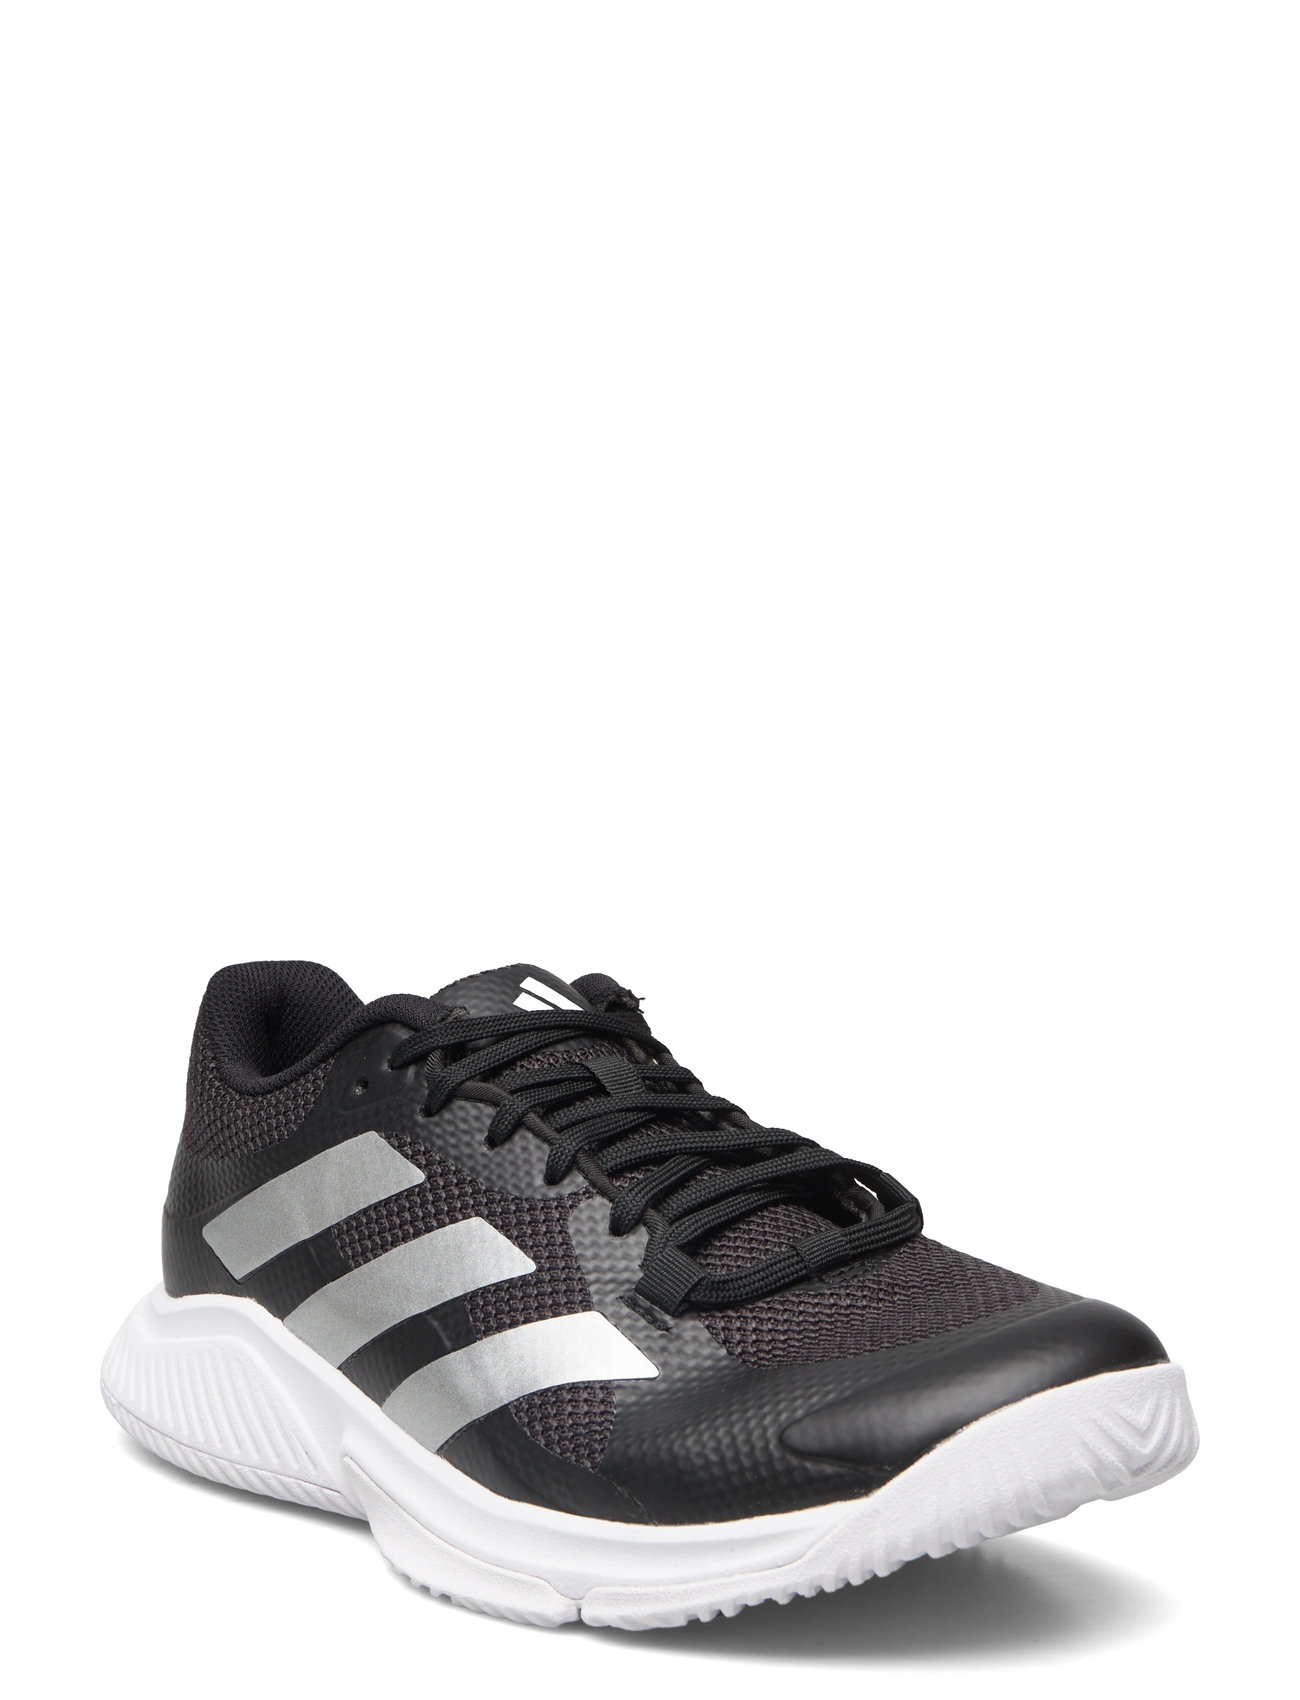 Court Team 2.0 W Sport Sport Shoes Indoor Sports Shoes Black Adidas Performance